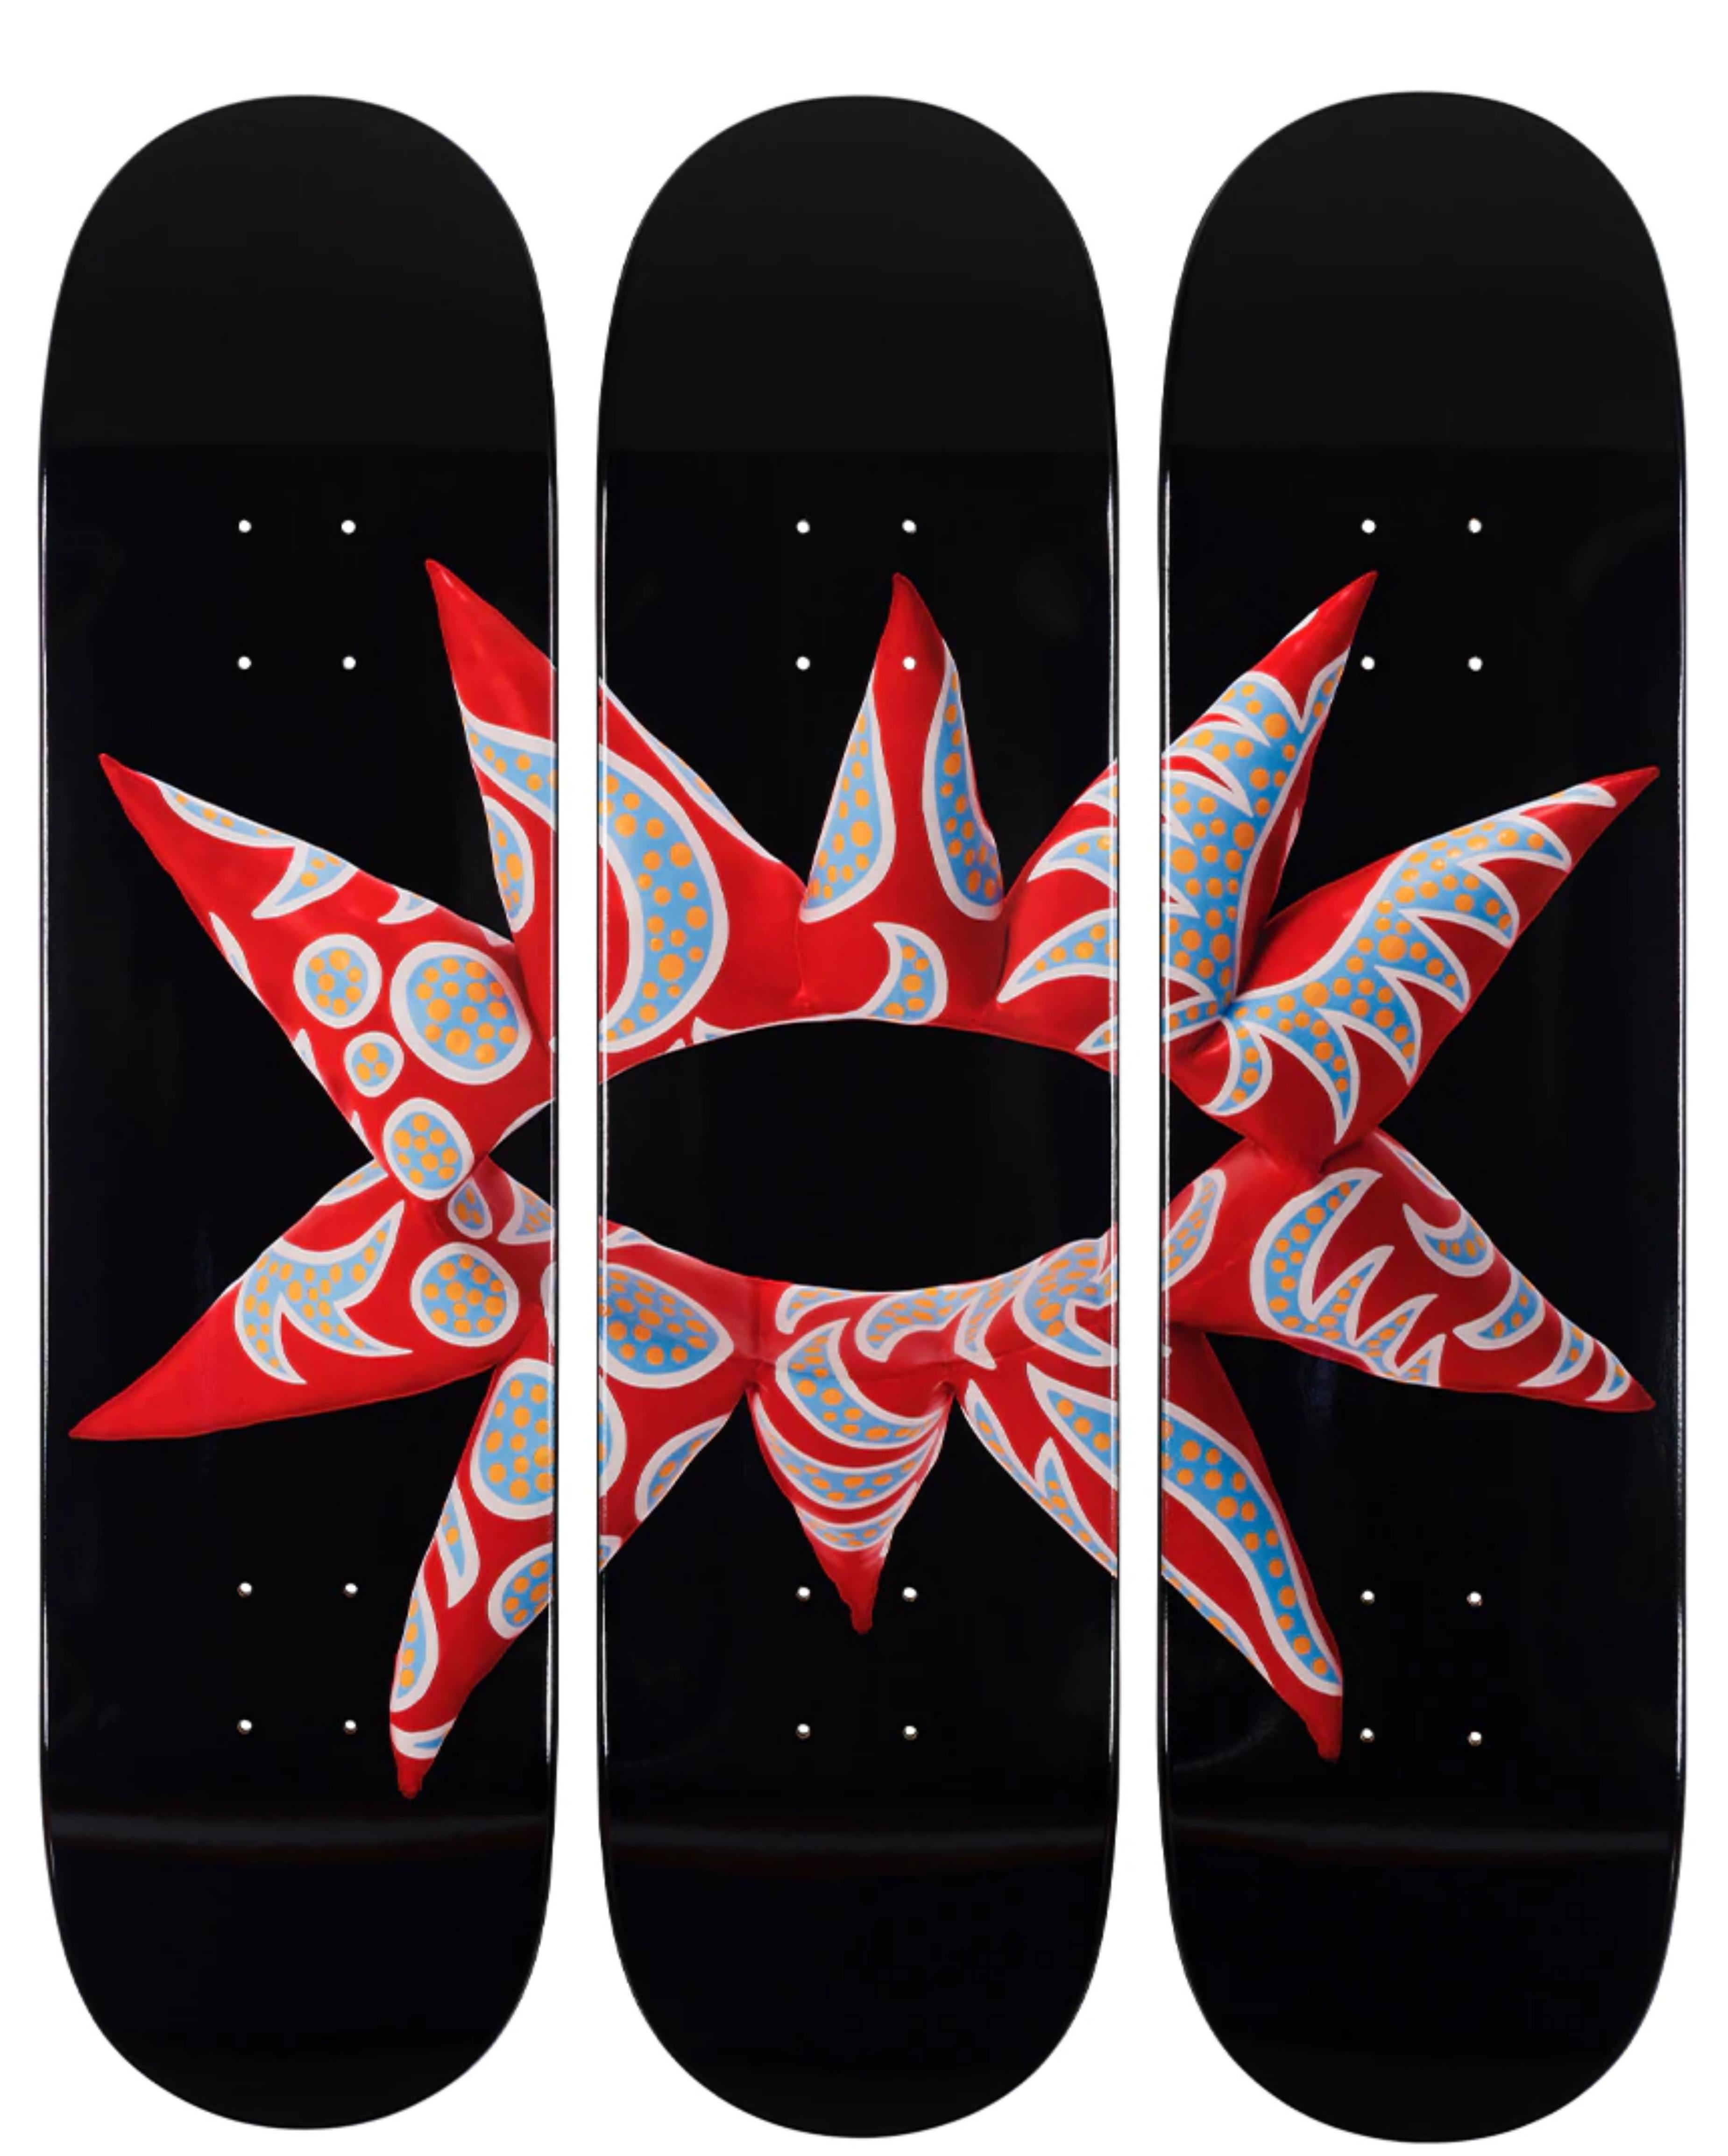 With all My Flowering Heart (A Complete Set of Three (3) Skate Decks - Pop Art Mixed Media Art by Yayoi Kusama